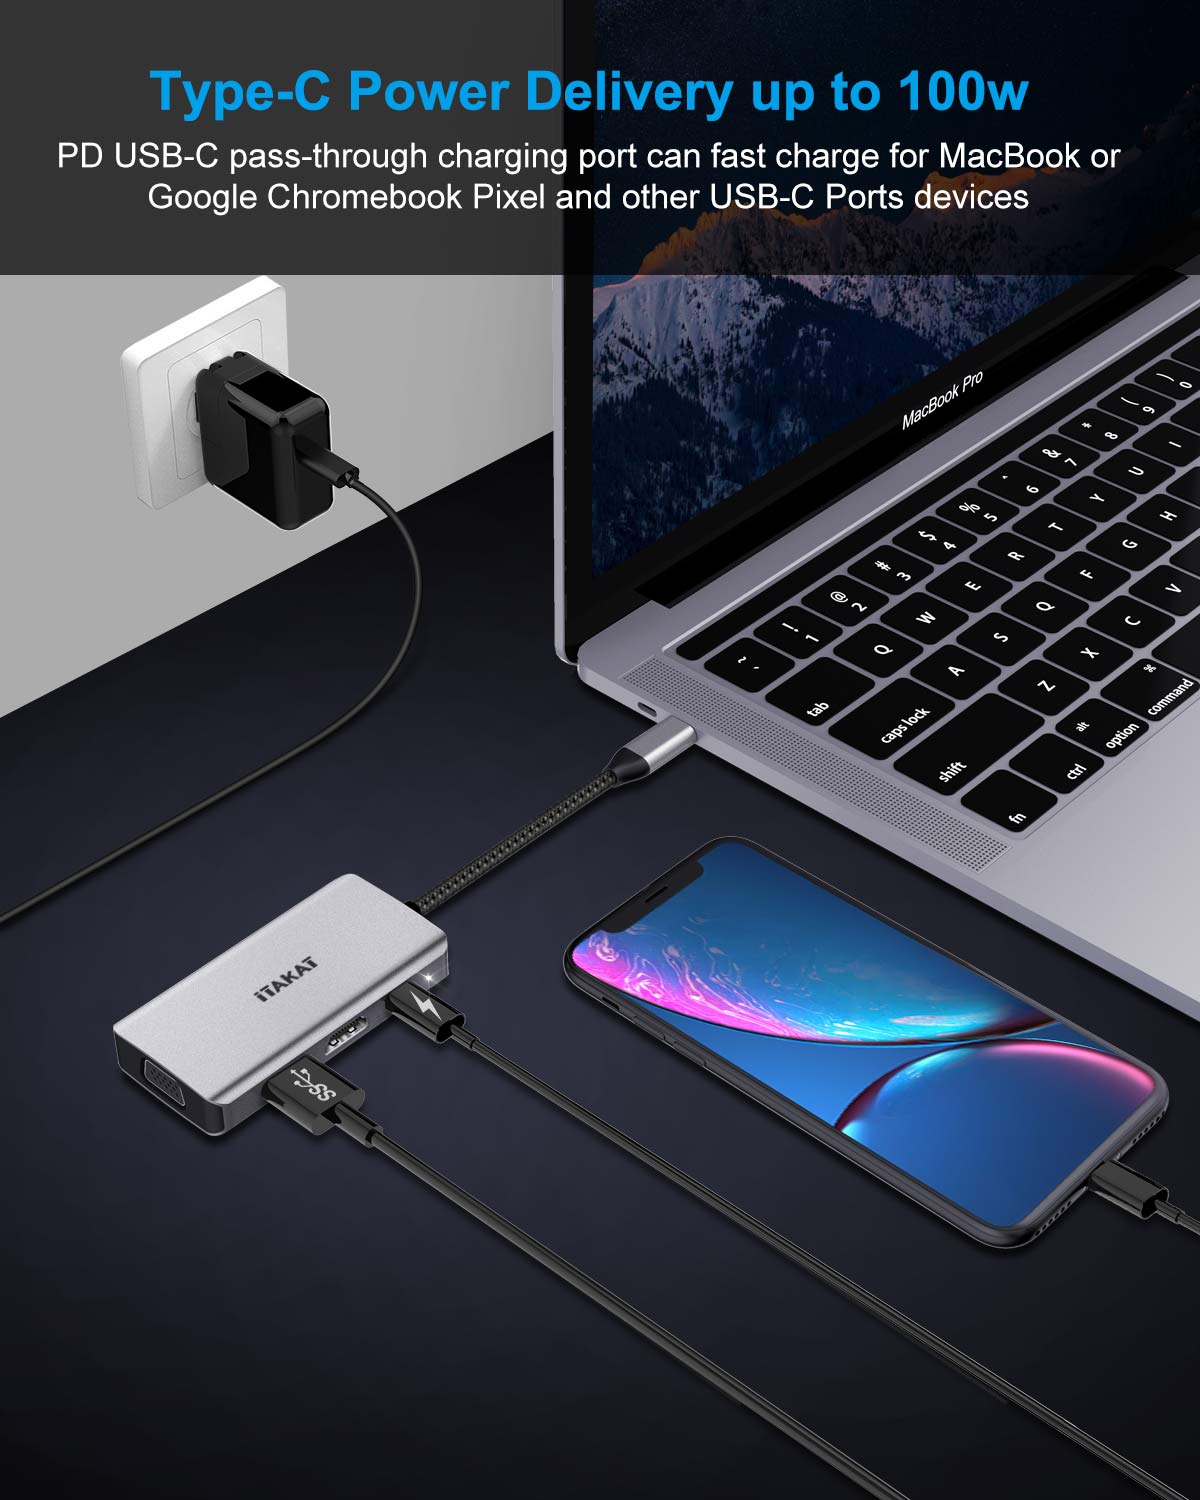 Usb C To Hdmi Vga Adapter, 2 In 1 Usb Type C To Vga Hdmi Converter Adapter